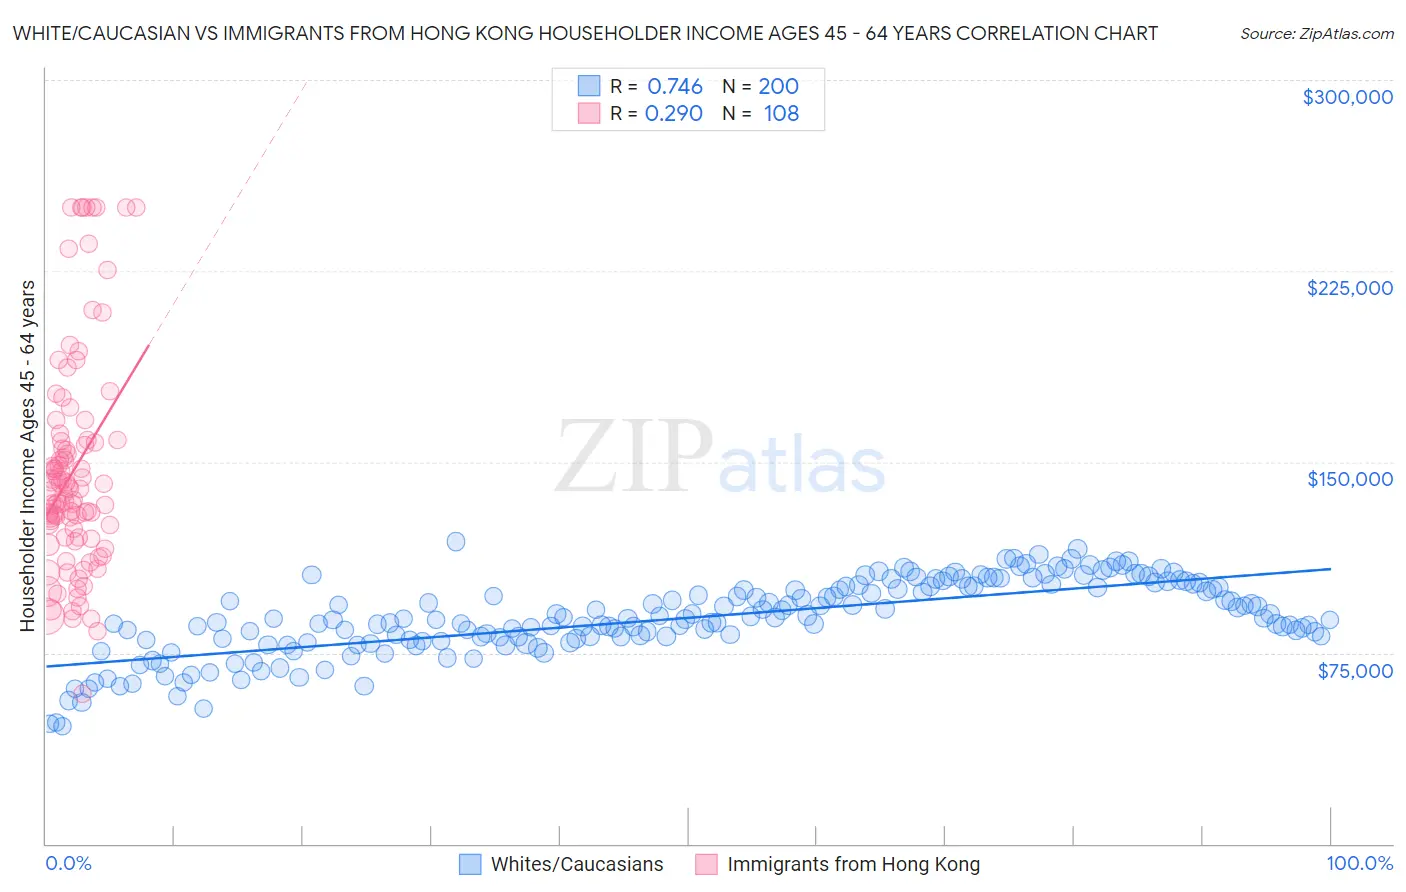 White/Caucasian vs Immigrants from Hong Kong Householder Income Ages 45 - 64 years